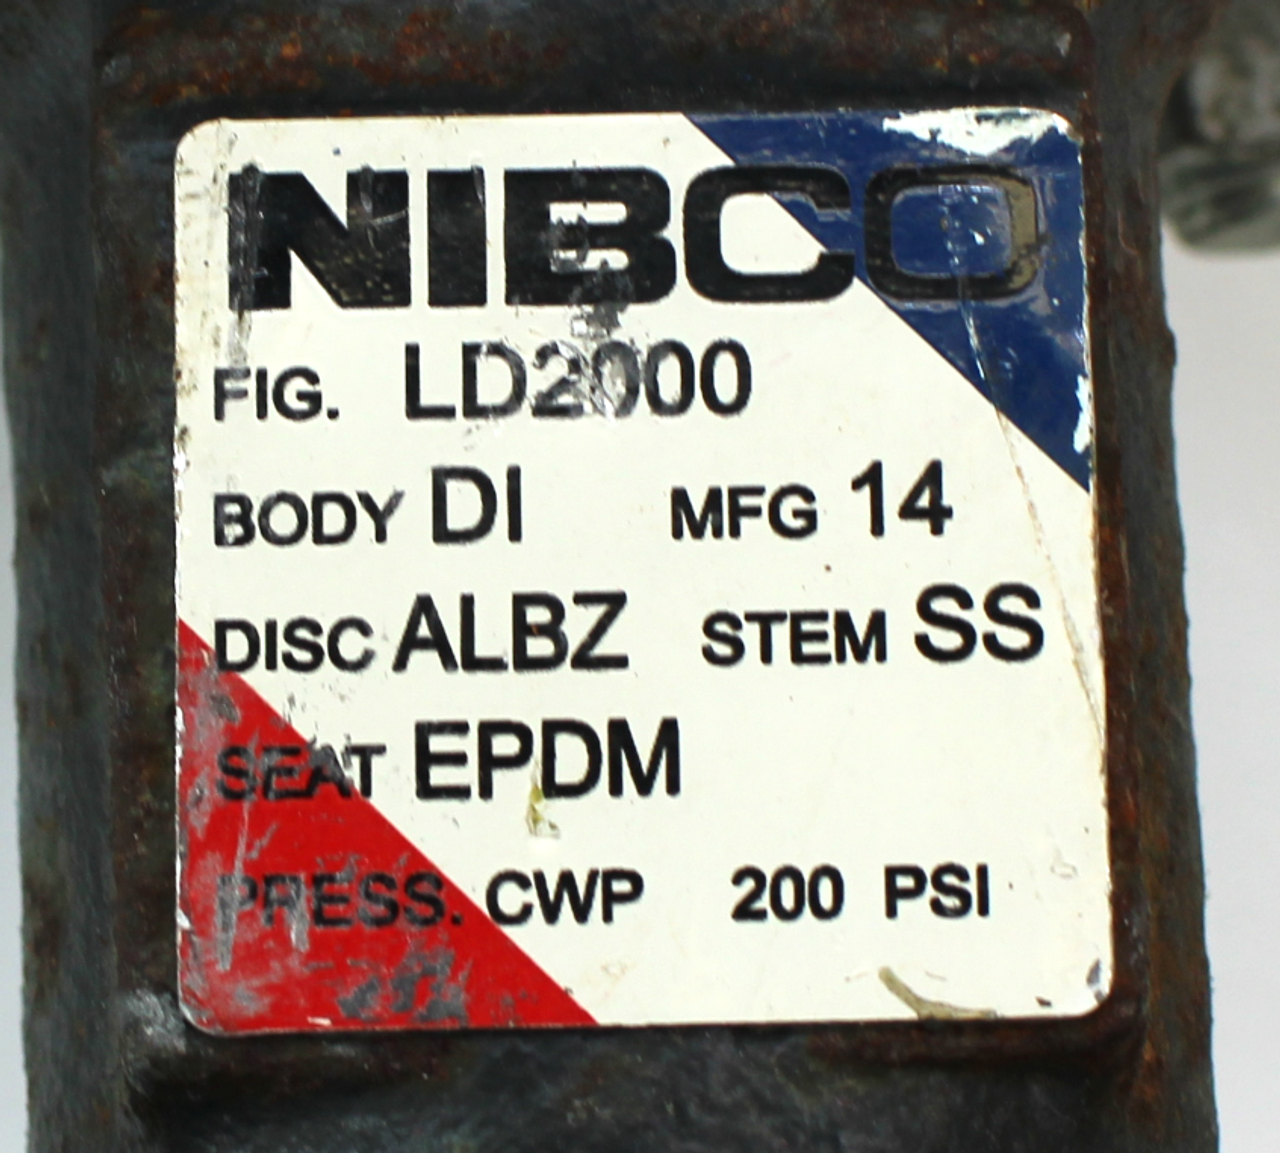 NIBCO LD2000 6" Butterfly Valve w/ ALBZ Disc, 200 PSI